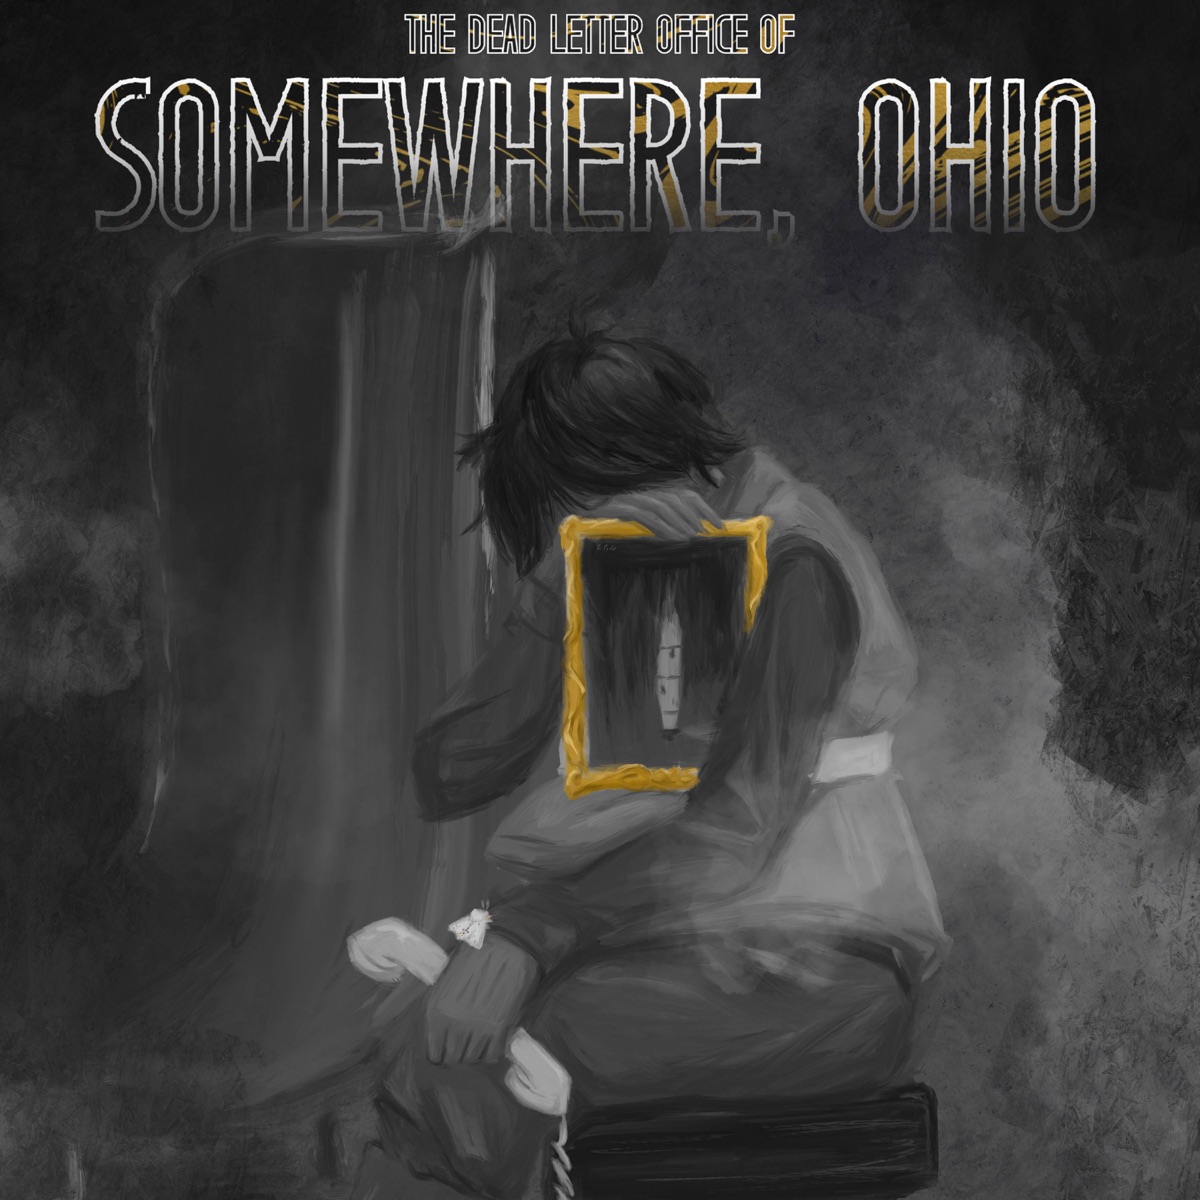 the Dead Letter Office of Somewhere, Ohio - Podcast – Podtail